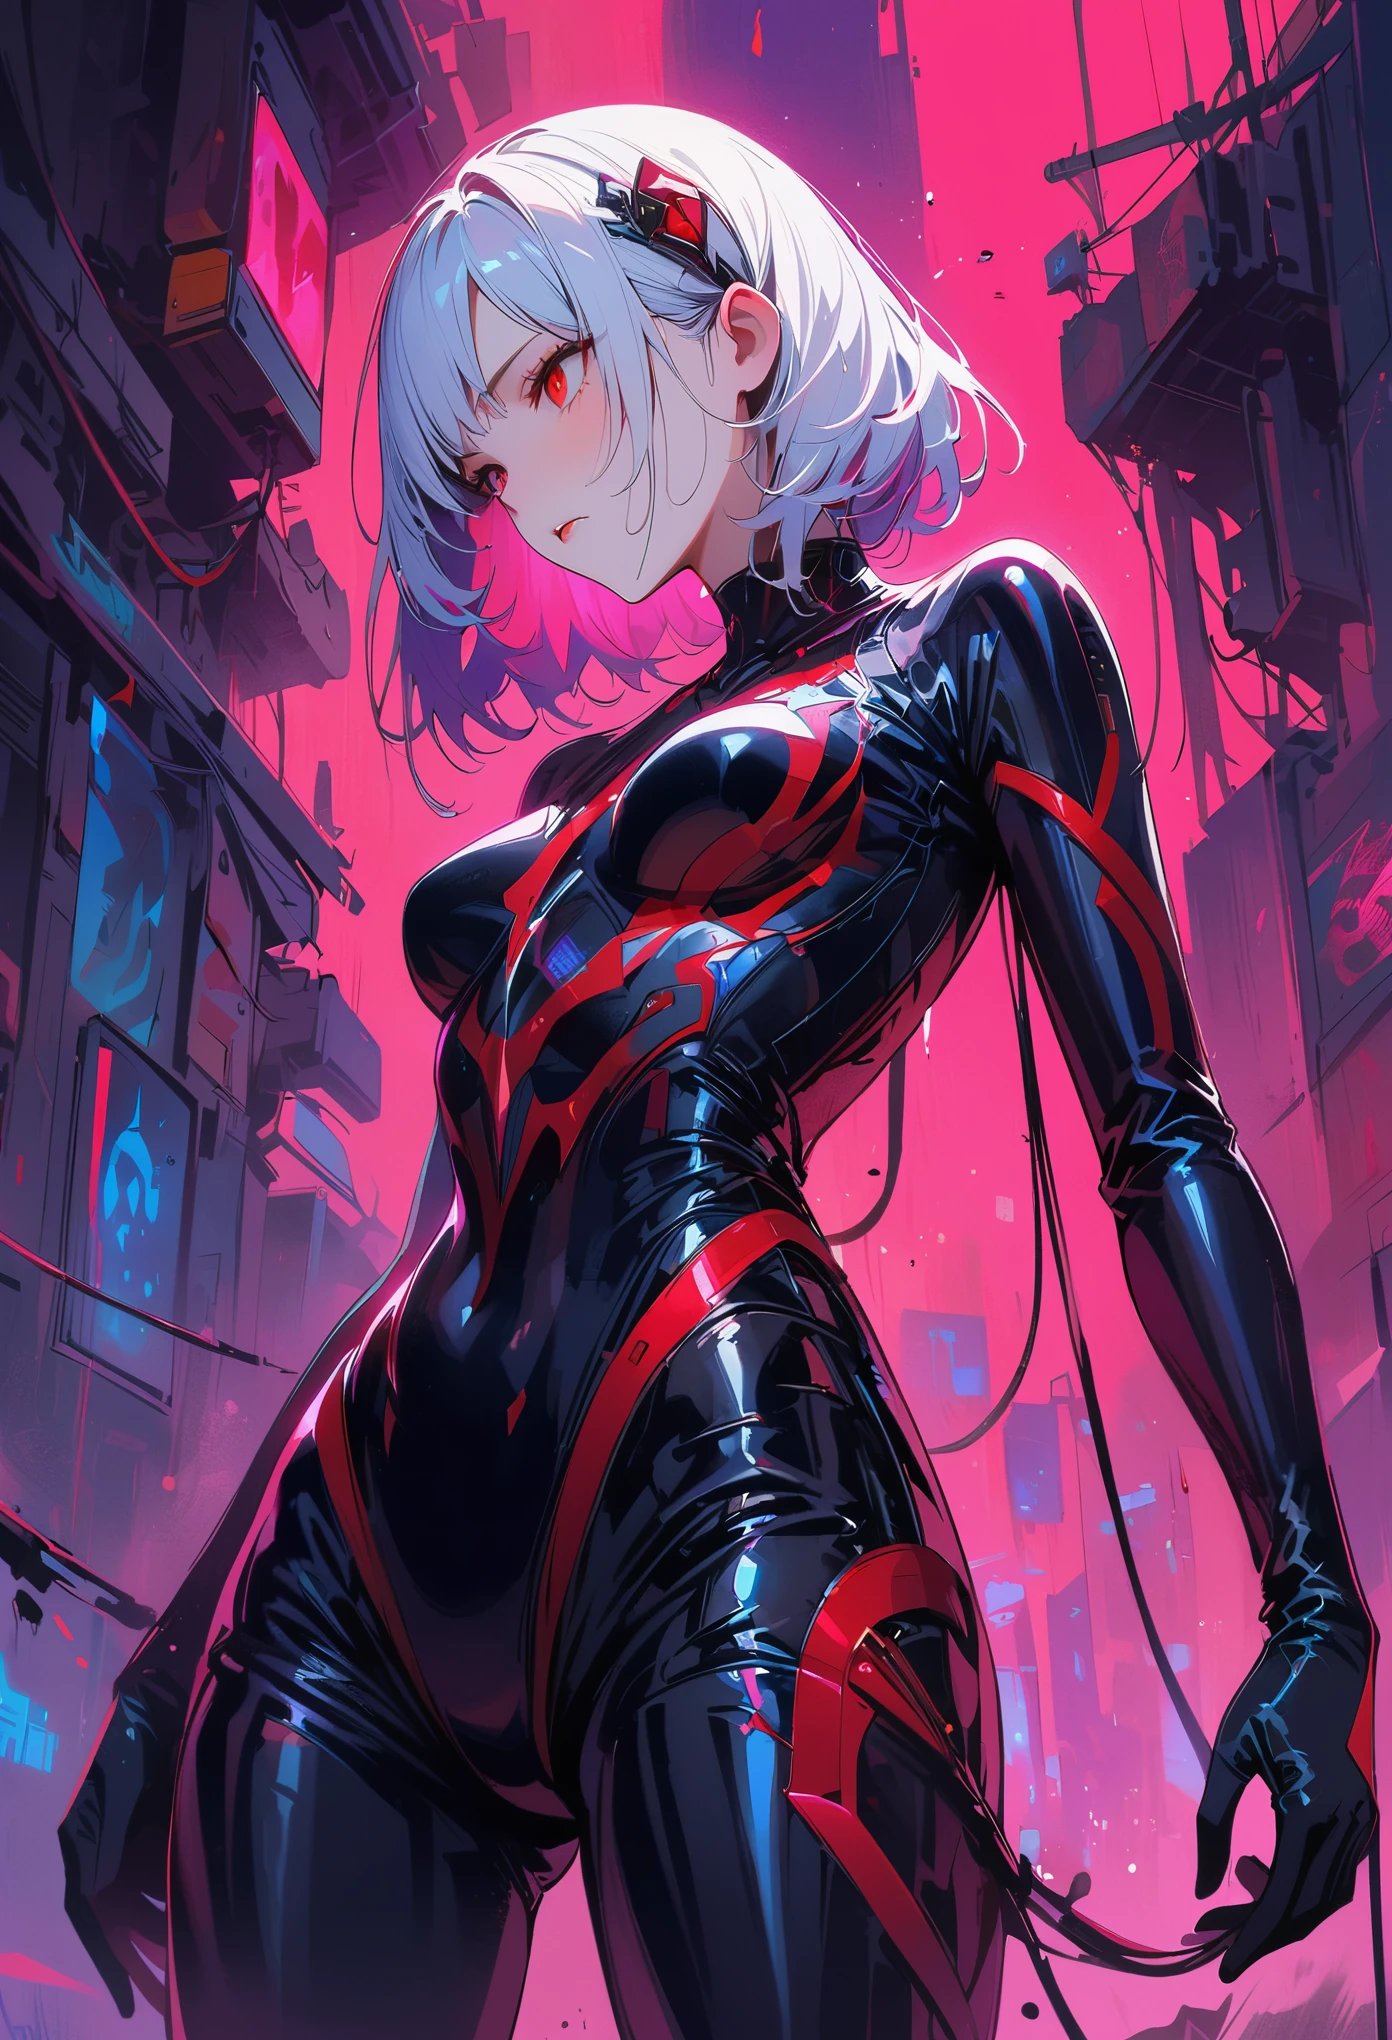 masterpiece， best quality， 8K， Digital painting， 1 girl， solo， stand up， youth， White hair， long white hair， hair accessories， red eyes， round pupils， Emotionless expression， blood stains， Mechanical Parts， electric wire， cable， failure effect， horrifying， science fiction， futuristic， Dark inside the background， neon lights， cyberpunk characters， Surreal， weird， Disturbing， spine-chilling， horrifying， jumpsuit，Red eyes，Venom Possession，blackened，Long black gloves，One-piece Pants，tight latex bodysuit，Highlight her graceful figure,wrap the whole body，symbiont，（（Raised sexy）），jumpsuit，Red eyes，Venom Possession，blackened，Long black gloves，One-piece Pants，Black latex clothing，Blood-red eyes，best quality, High resolution, Super detailed, Vivid textures, mask, tight latex bodysuit, Bangs,purple hair, blue eyes
